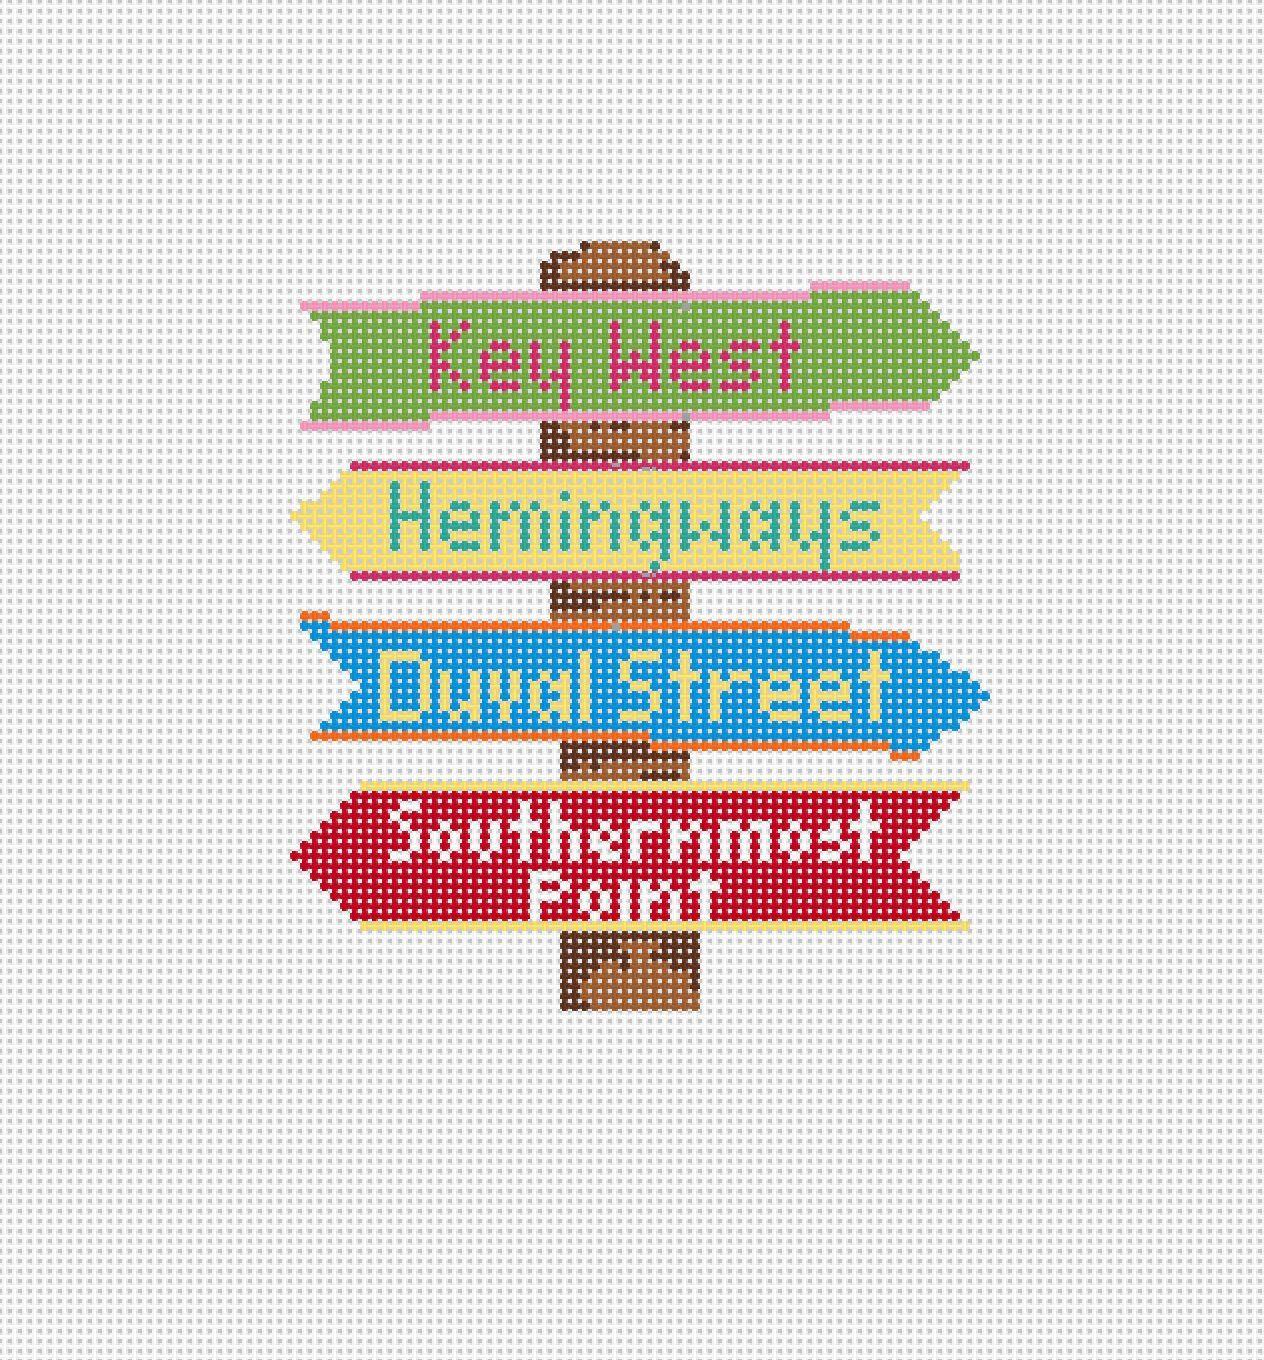 Key West Destination Sign - Needlepoint by Laura